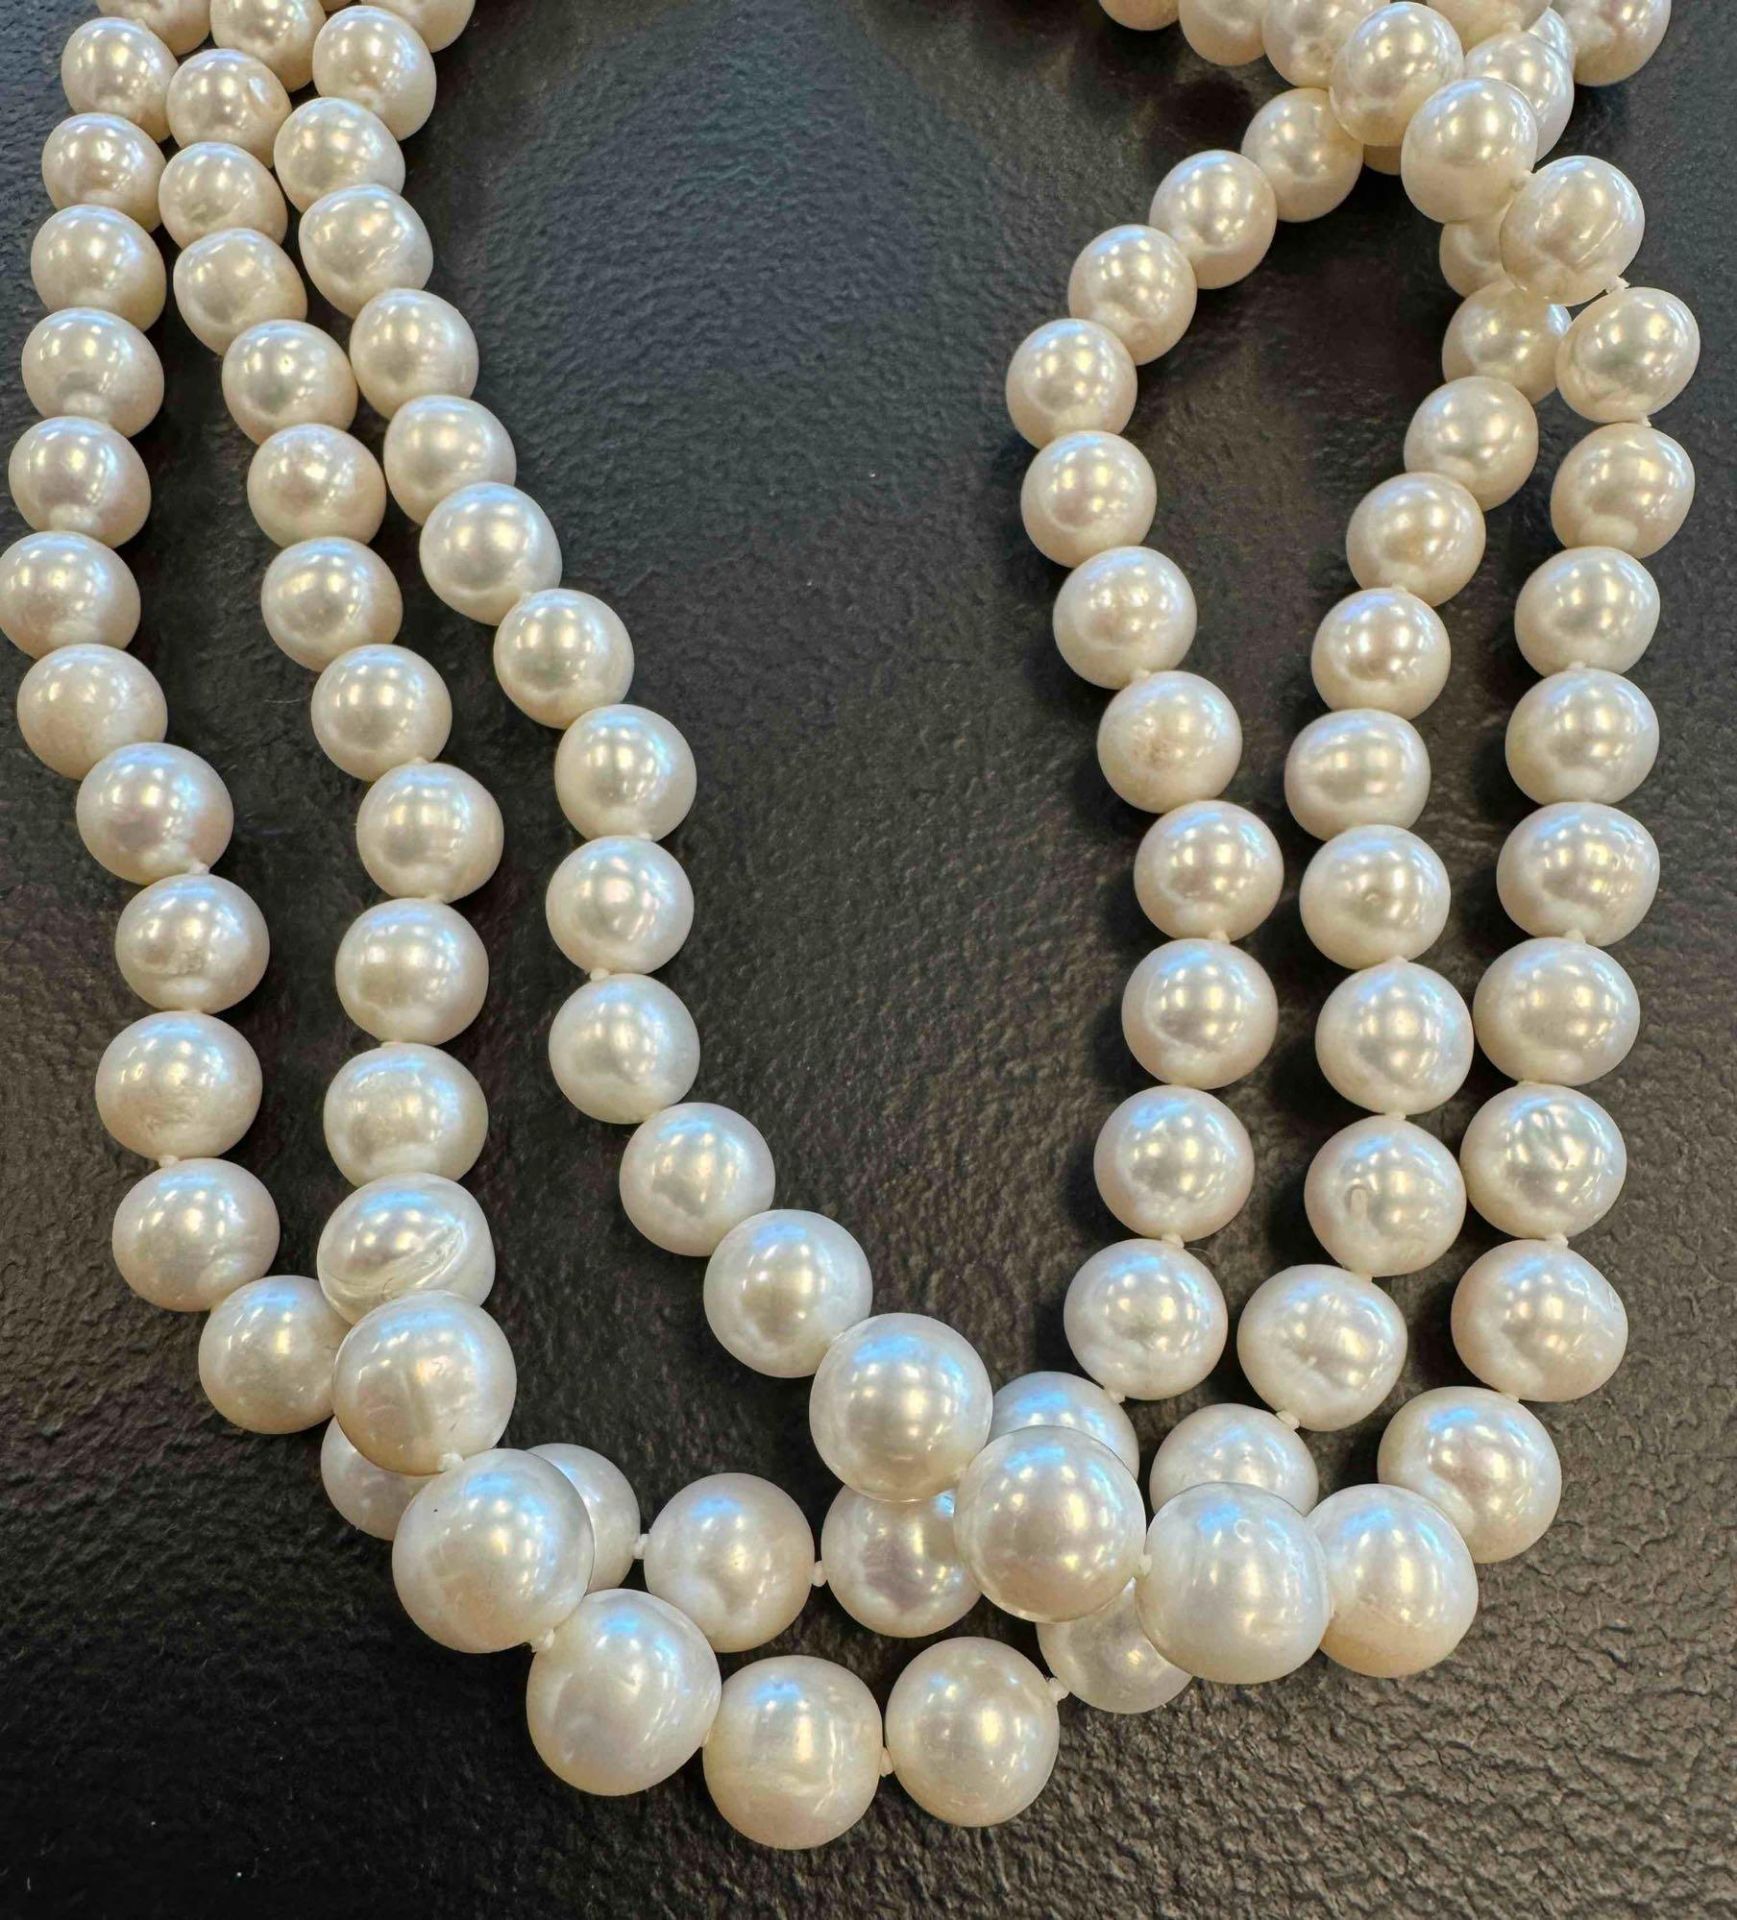 3 Strand Pearl Necklaces $1200 Retail - Image 2 of 5